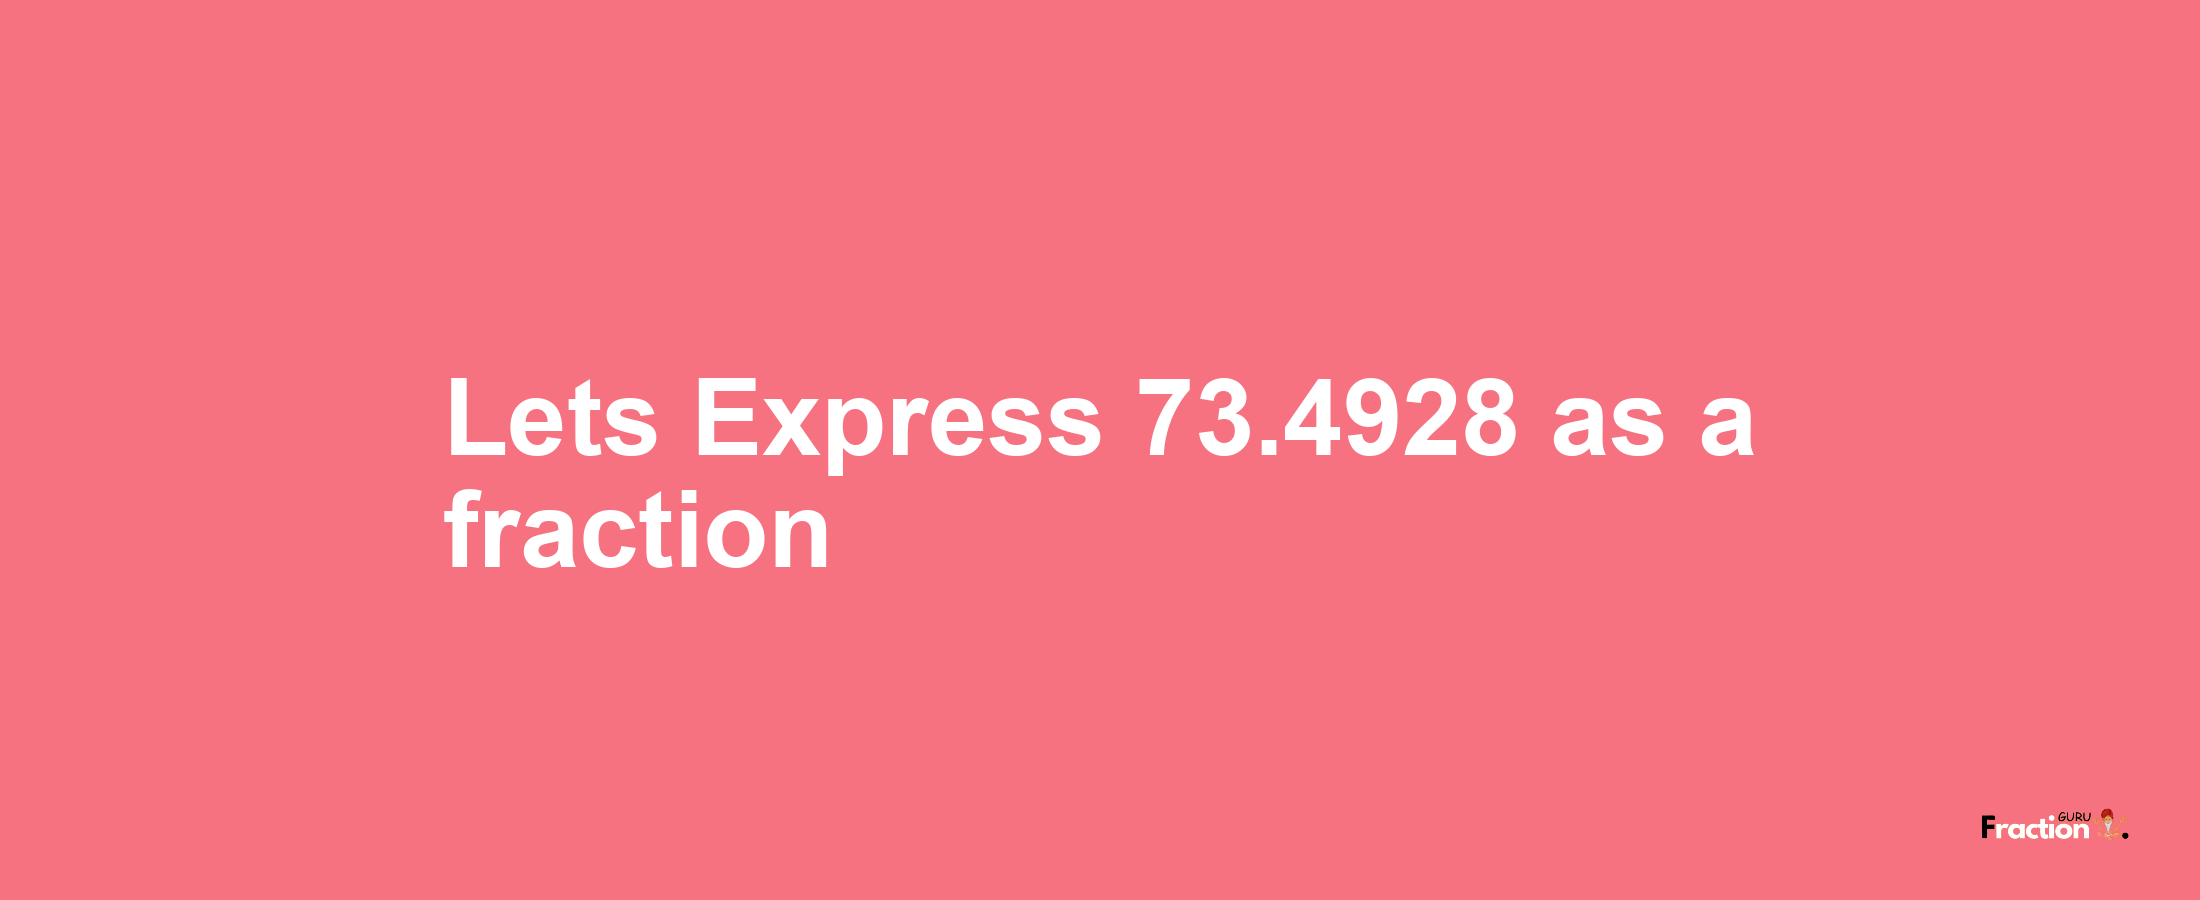 Lets Express 73.4928 as afraction